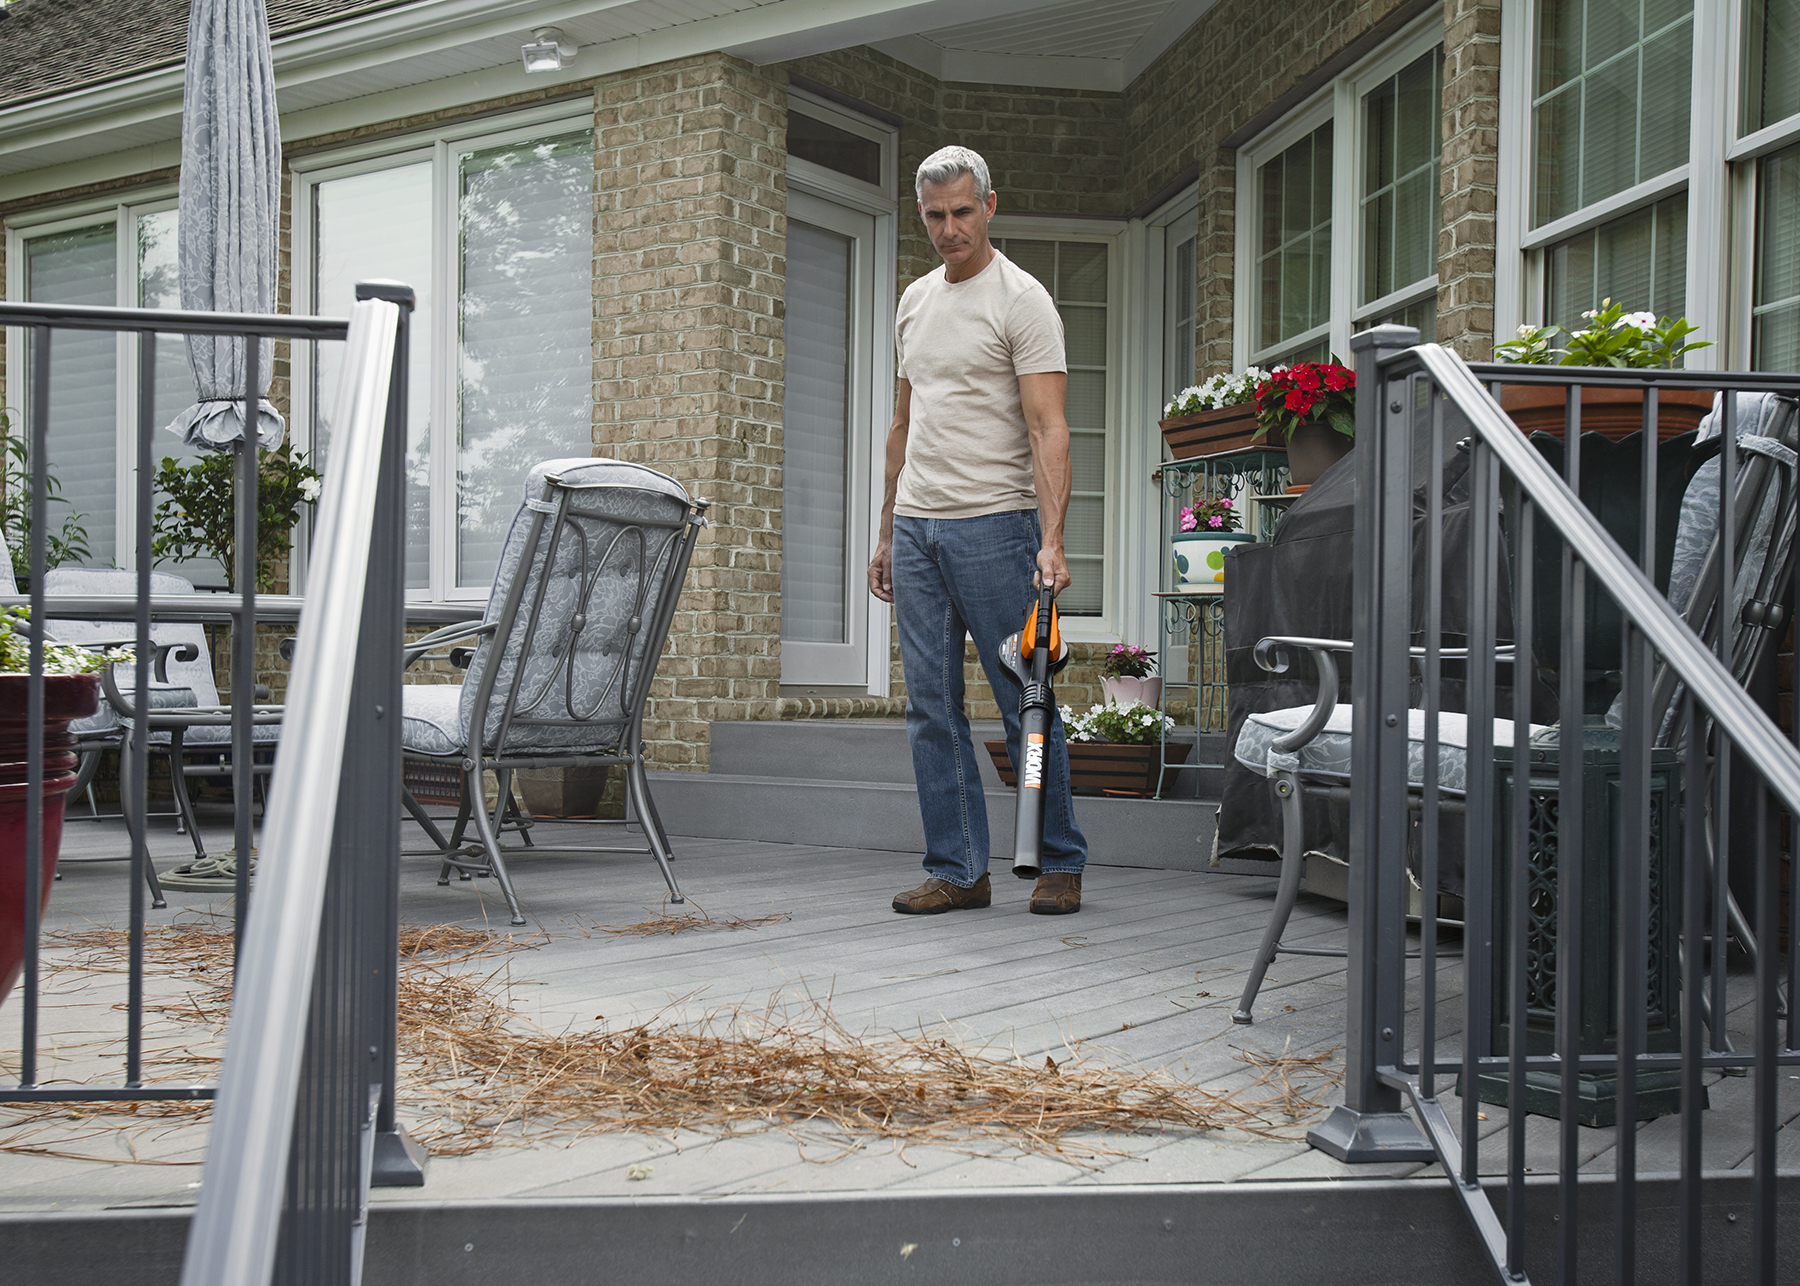 WORX AIR Blower/Sweeper clears porch of dirt and debris